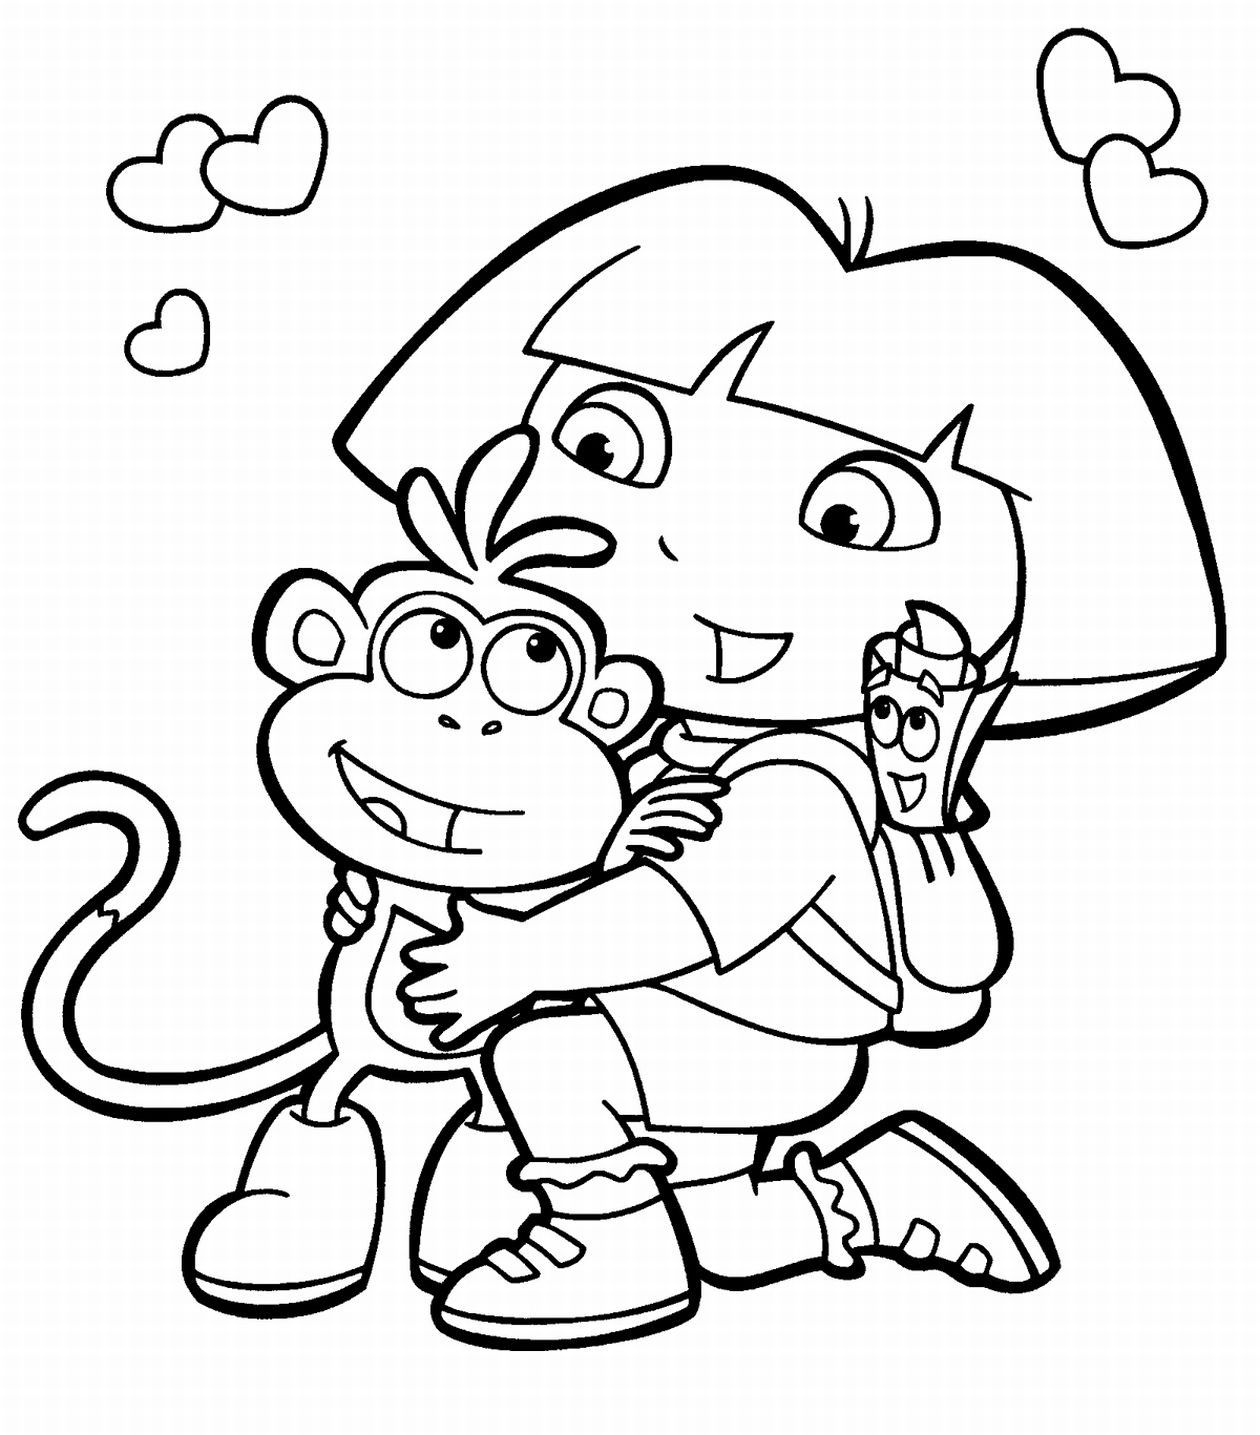 Amazing of Fabulous Kindergarten Coloring Pages Free Prin #261